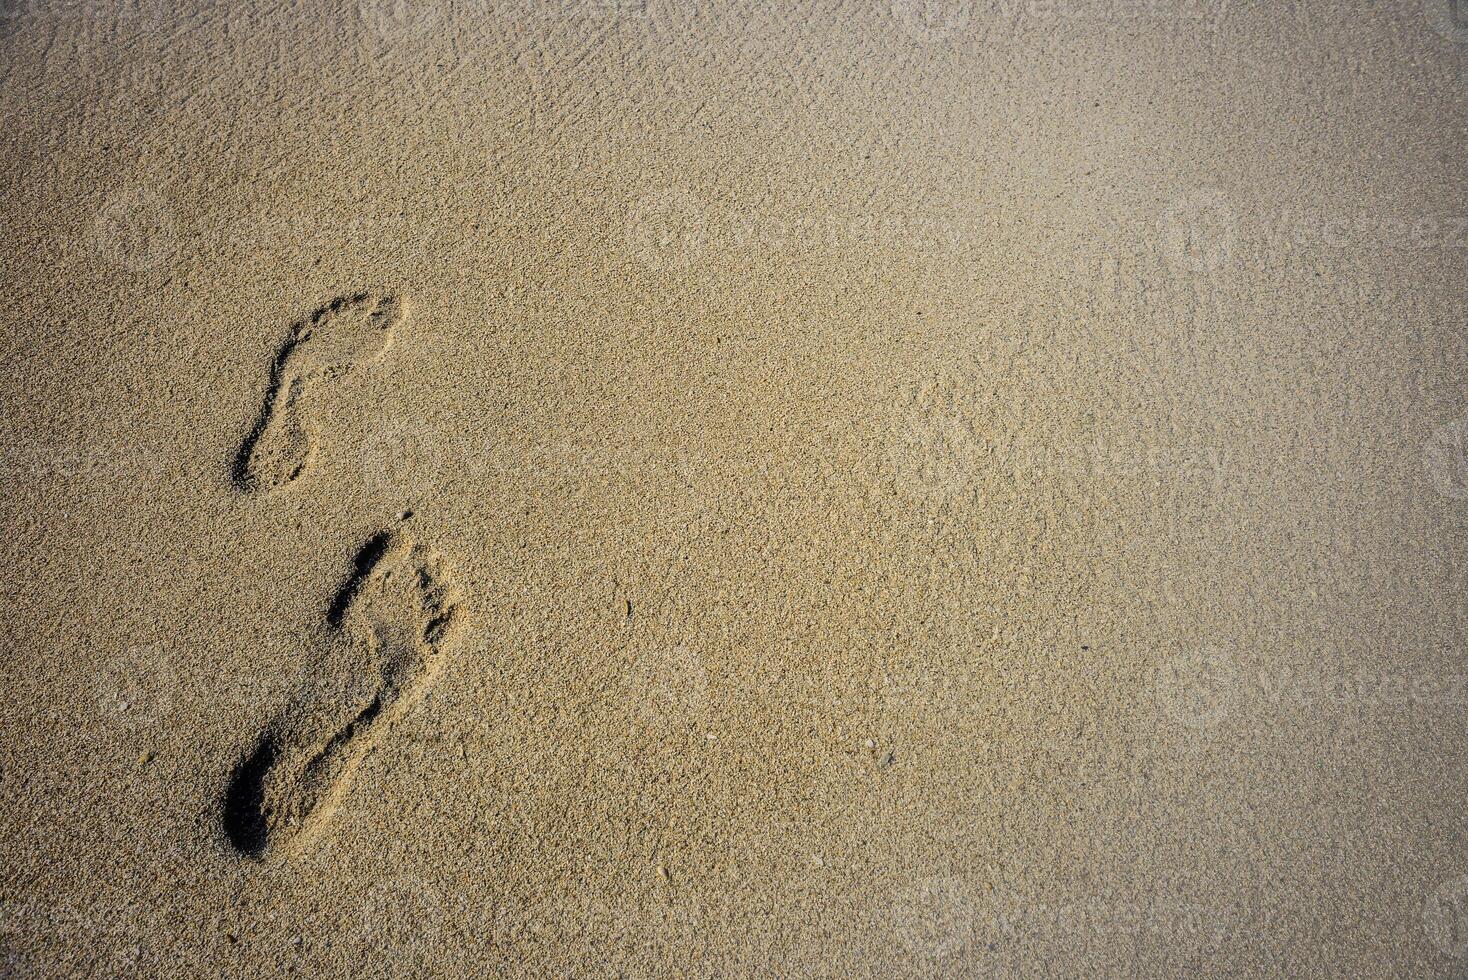 Human footprints in the sand photo